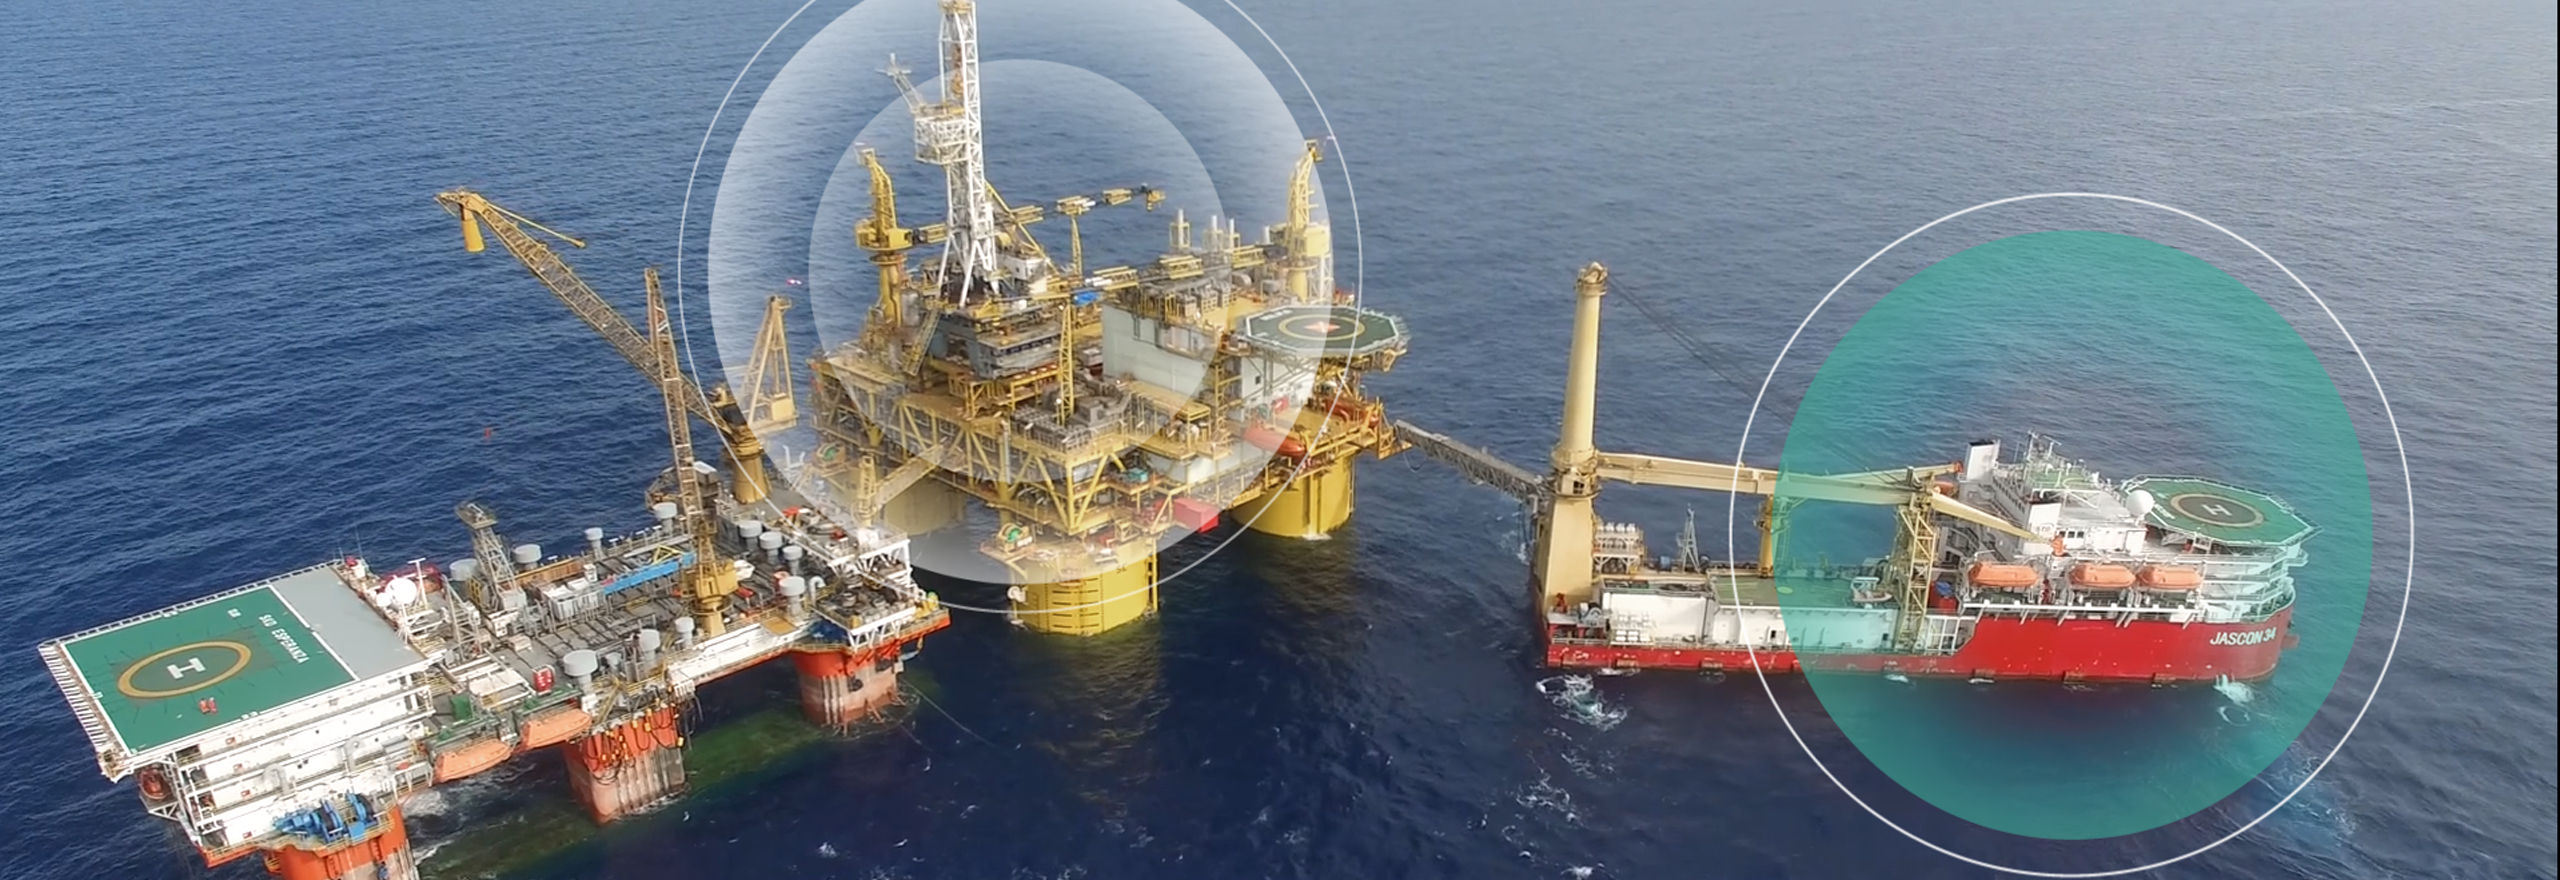 A red vessel and offshore oil rig on the ocean with circle overlays. 